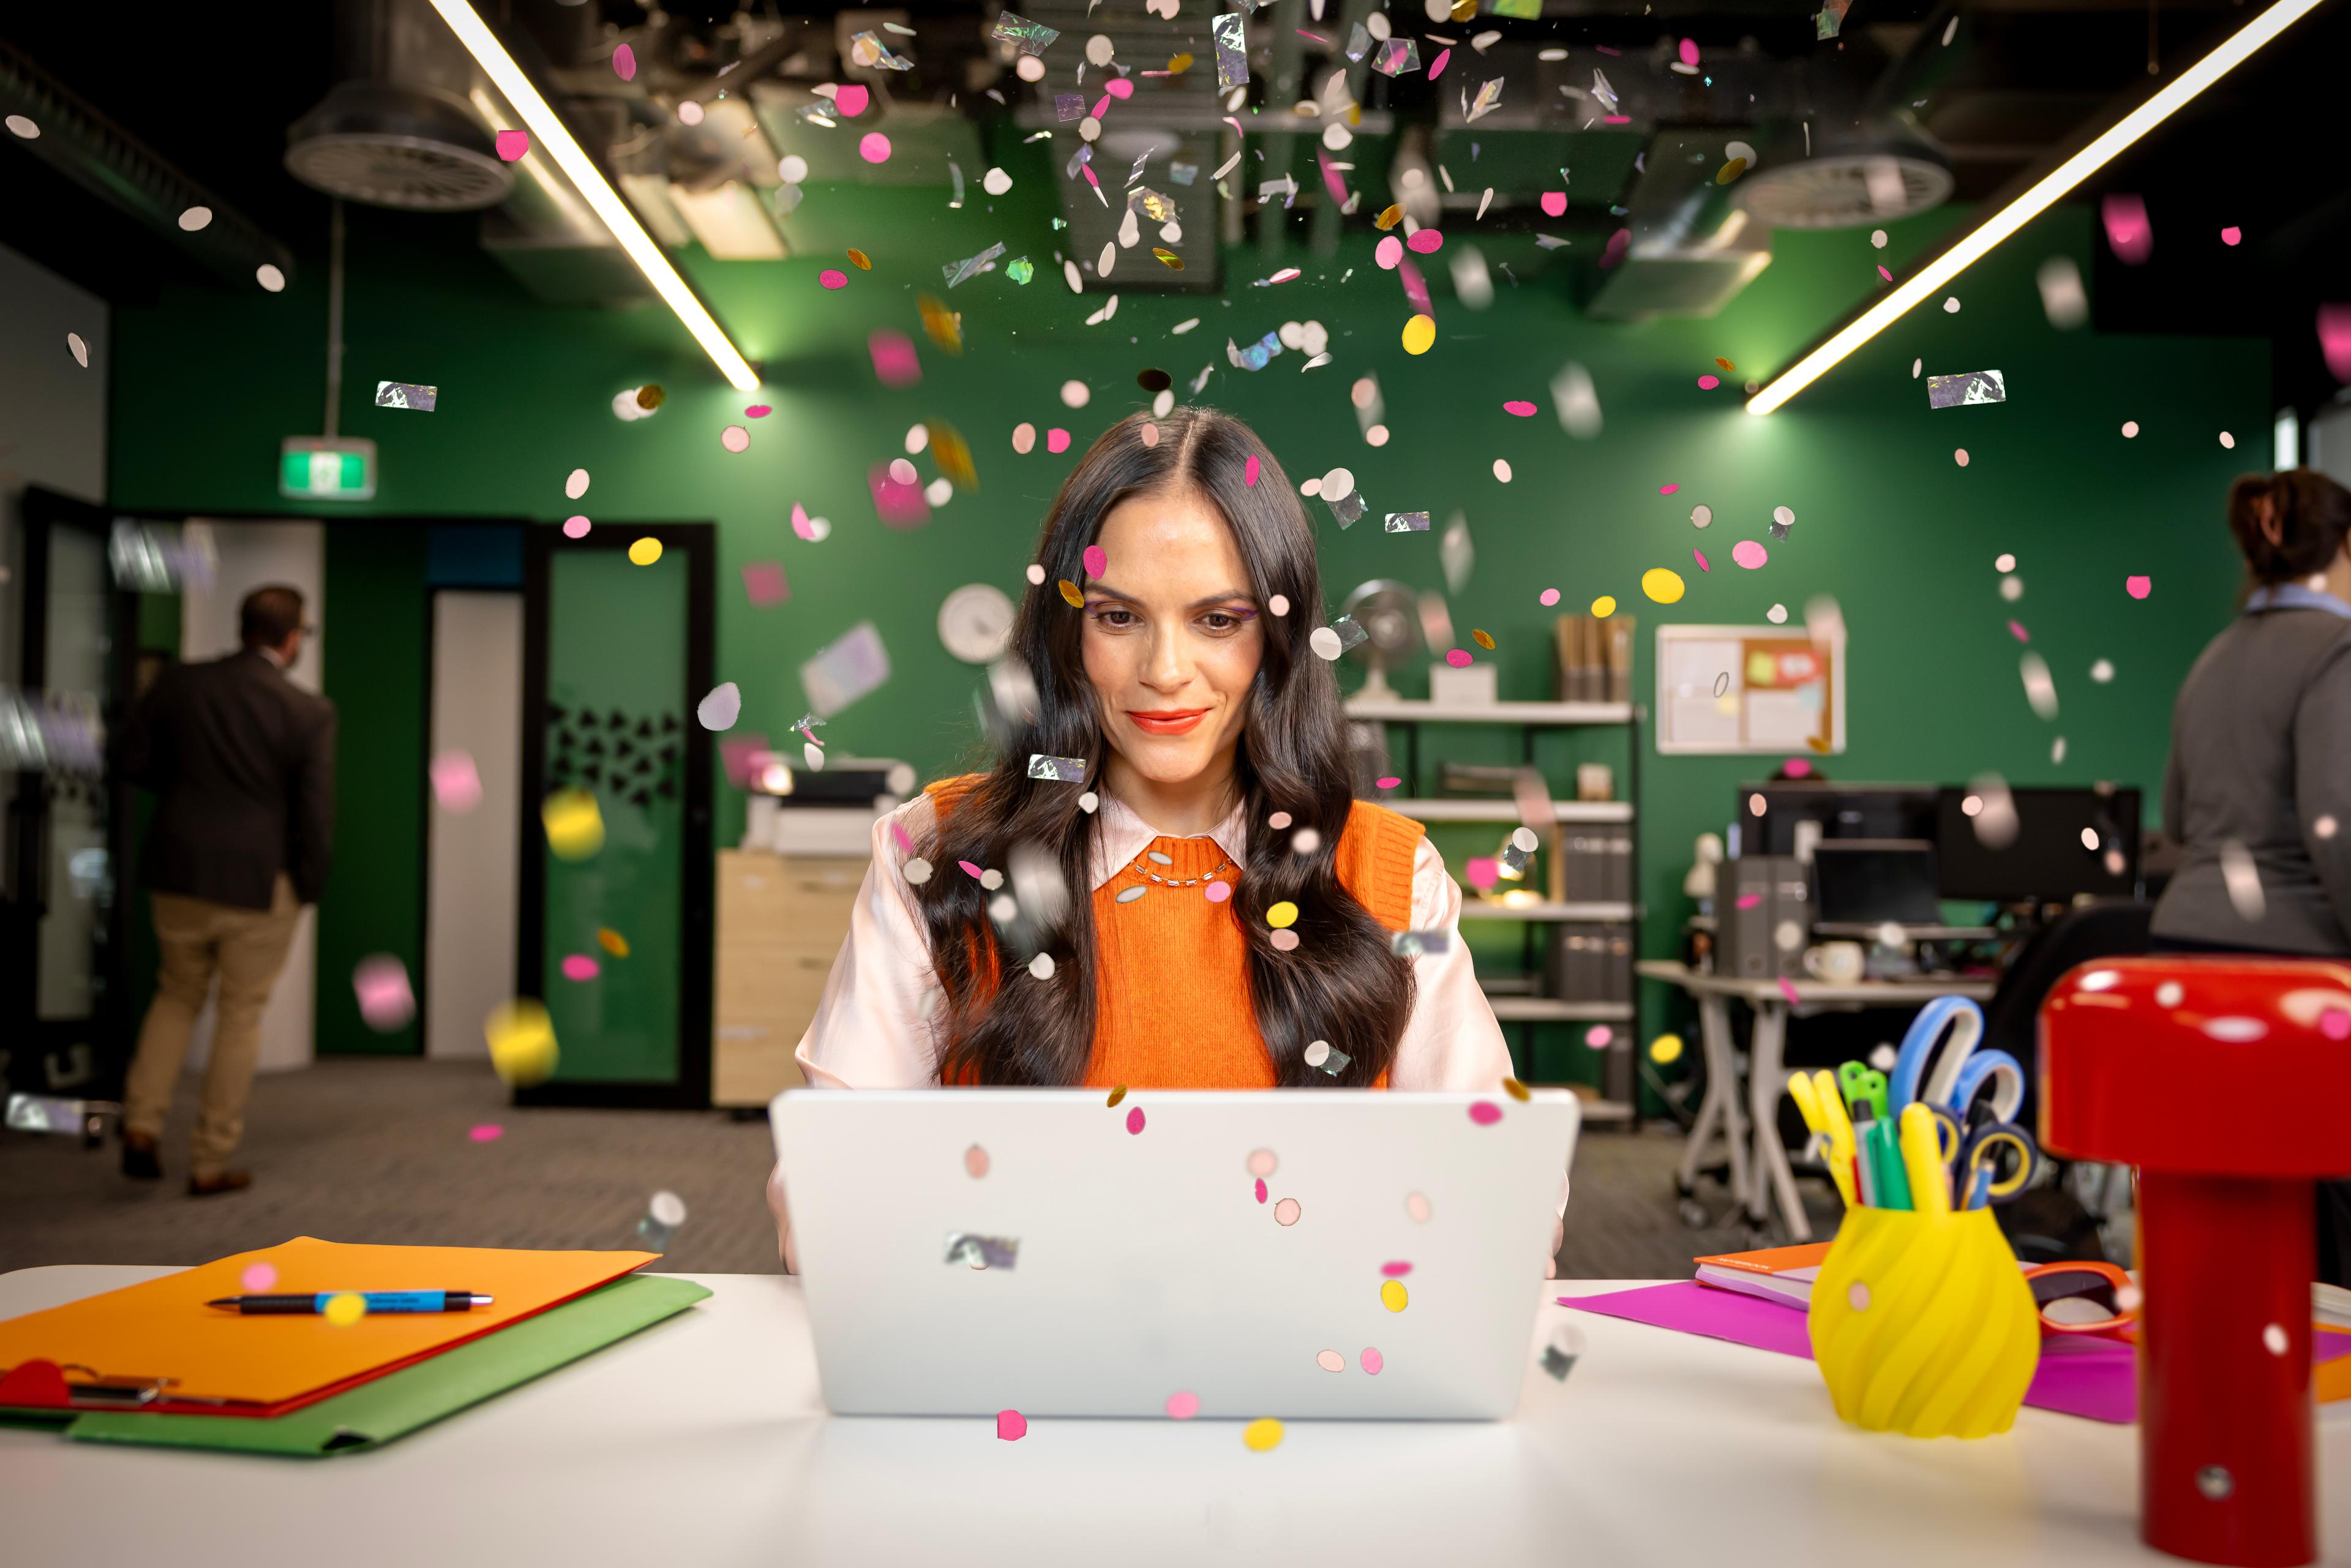 A woman at her desk, celebrating with confetti in an office with a green backdrop.